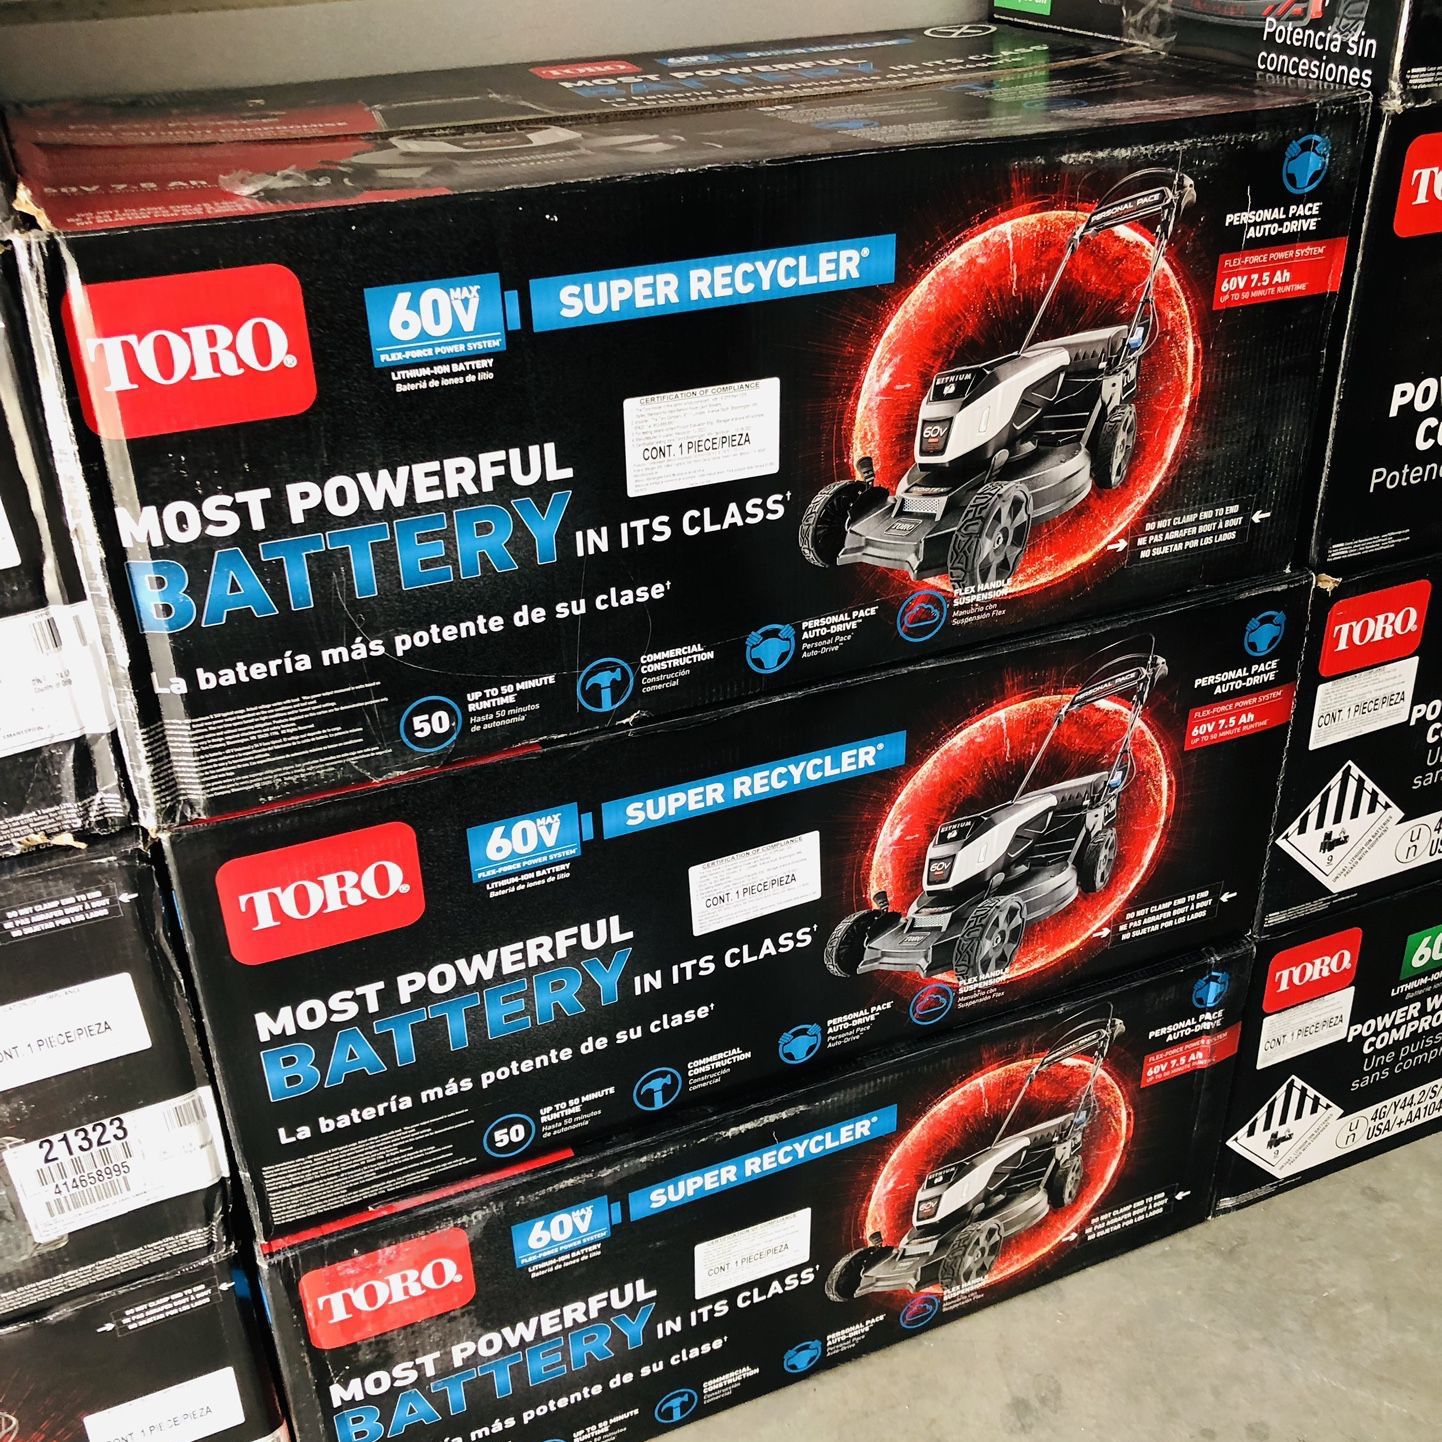  NEW IN BOX ! TORO 21” SUPER RECYCLER VORTEX SELF PROPELLED REAR WHEEL DRIVE PERSONAL PACE AUTO DRIVE 60 VOLT FLEX FORCE BATTERY POWERED MOWER KIT! 